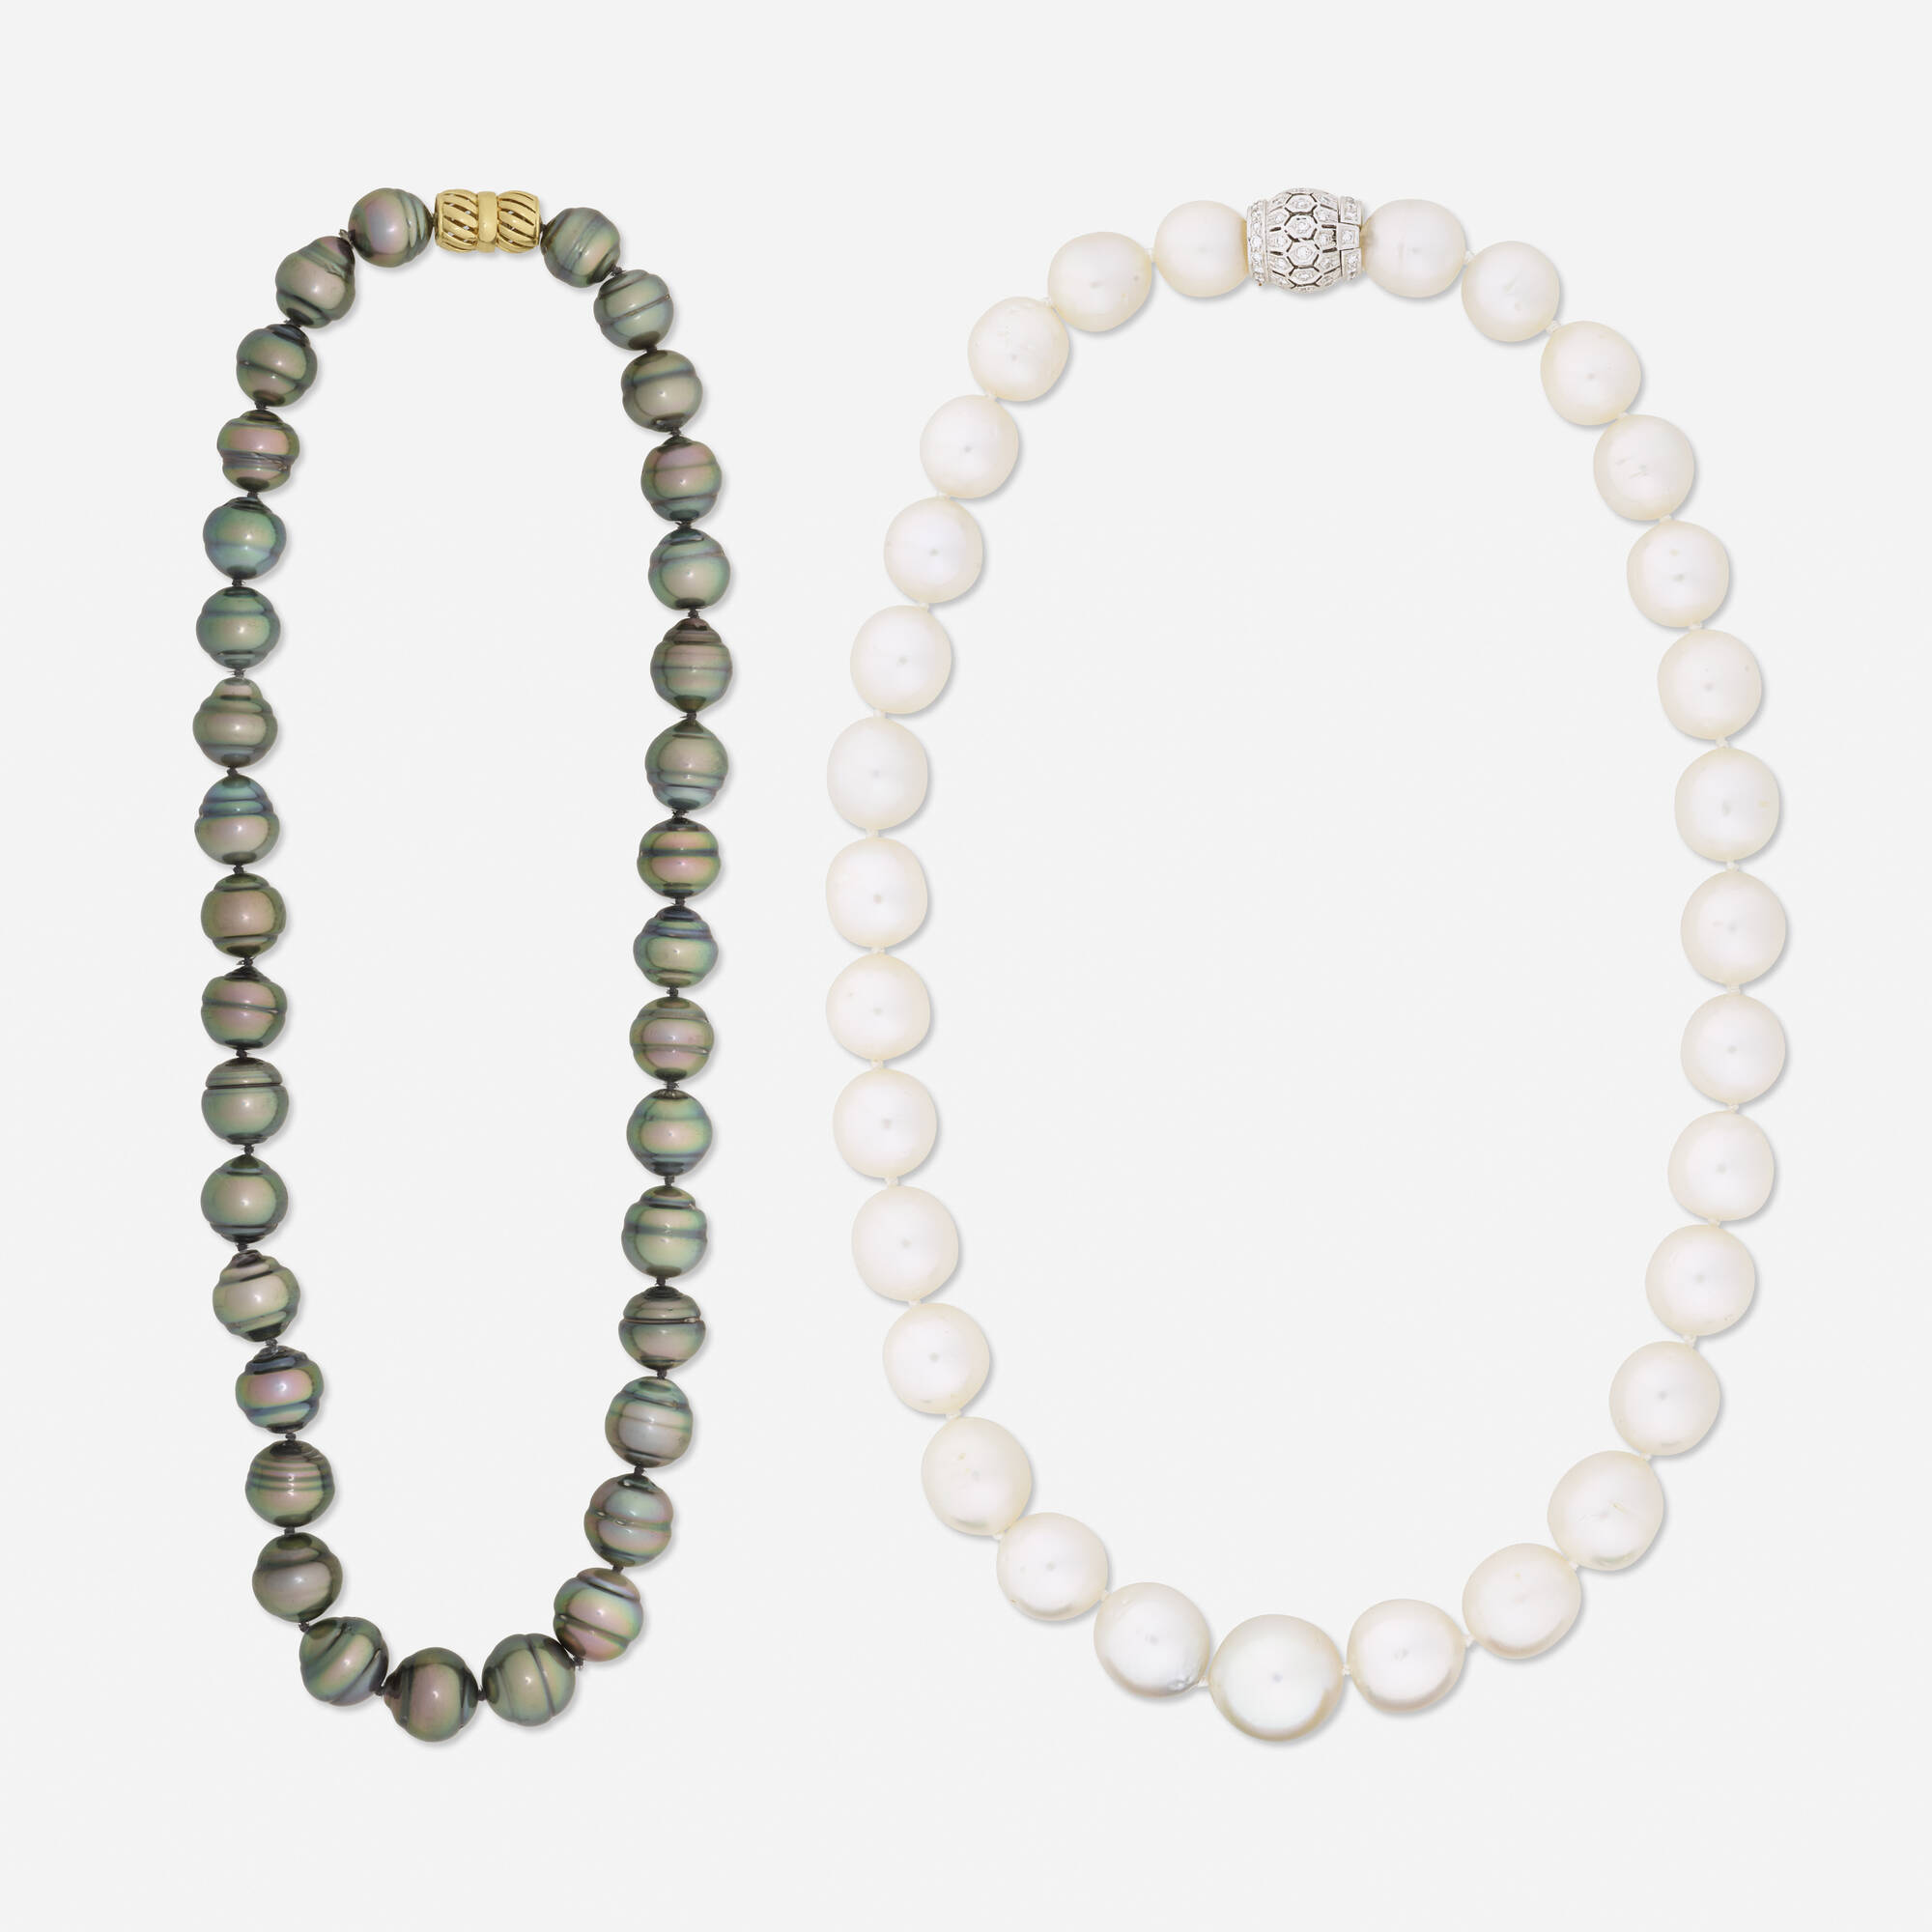 294: Two cultured pearl necklaces